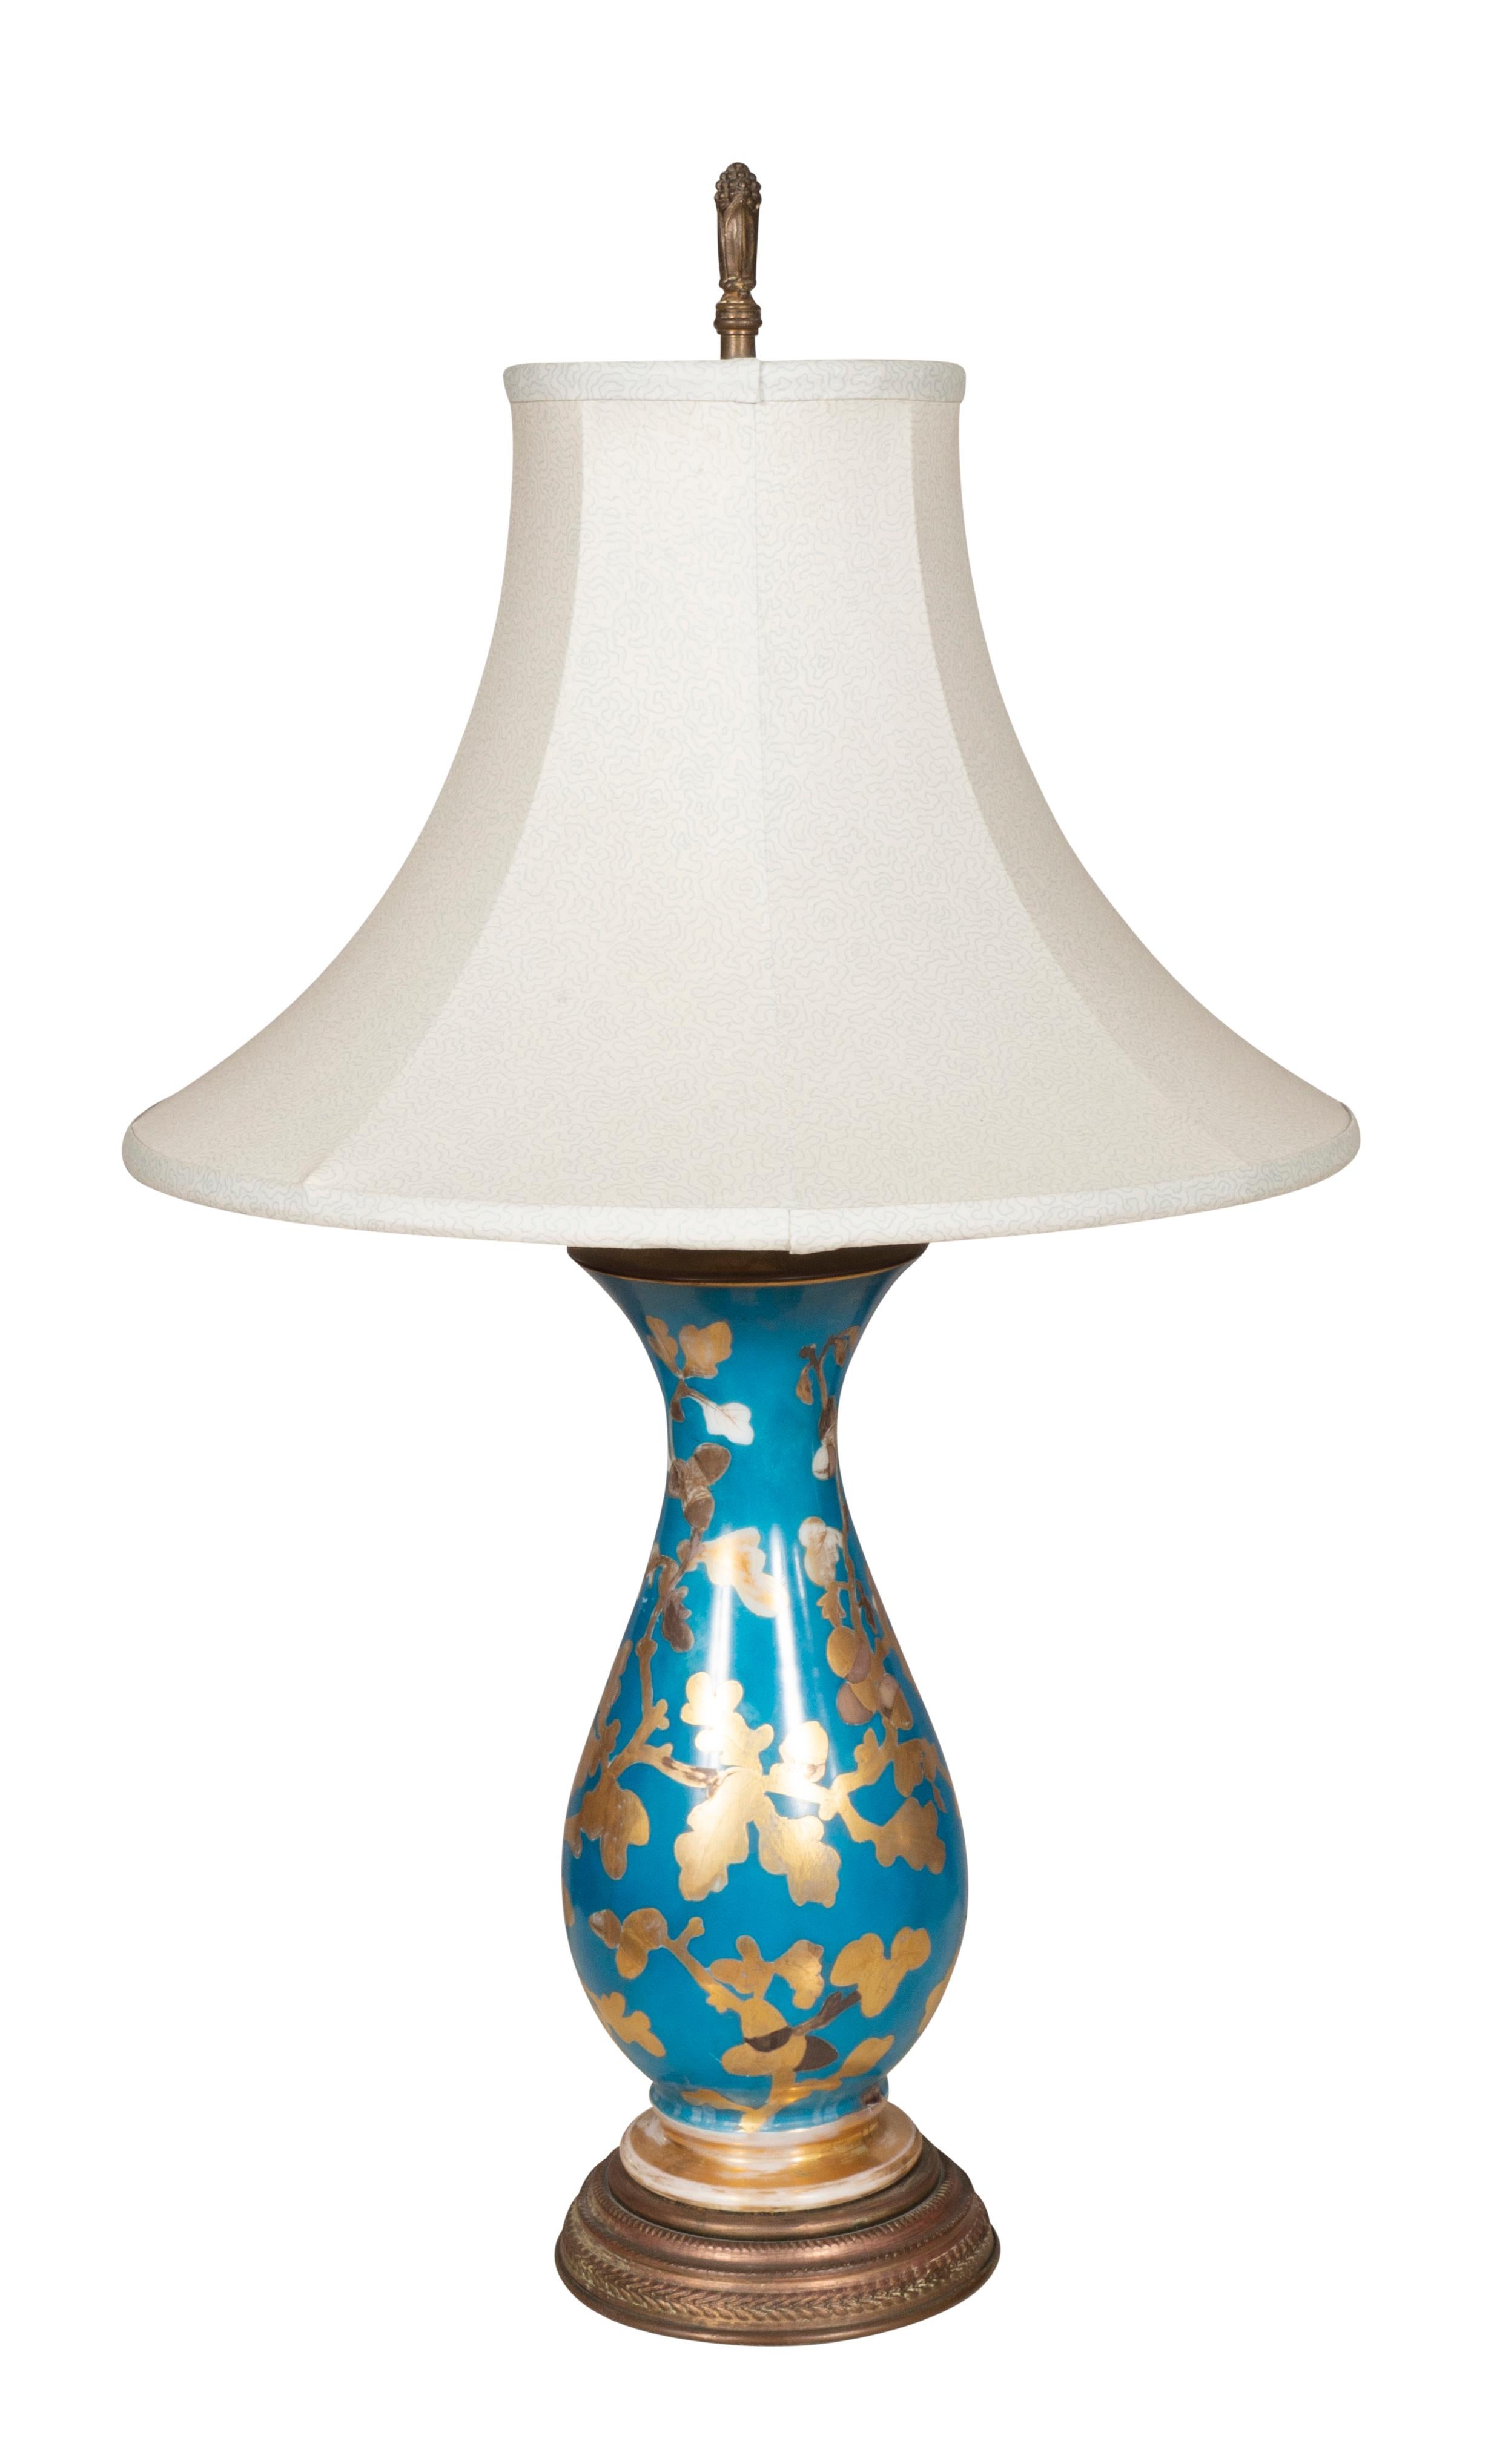 Baluster form with a blue ground with gold trailing leaves. Conforming brass base. Single light. With shades if wanted.